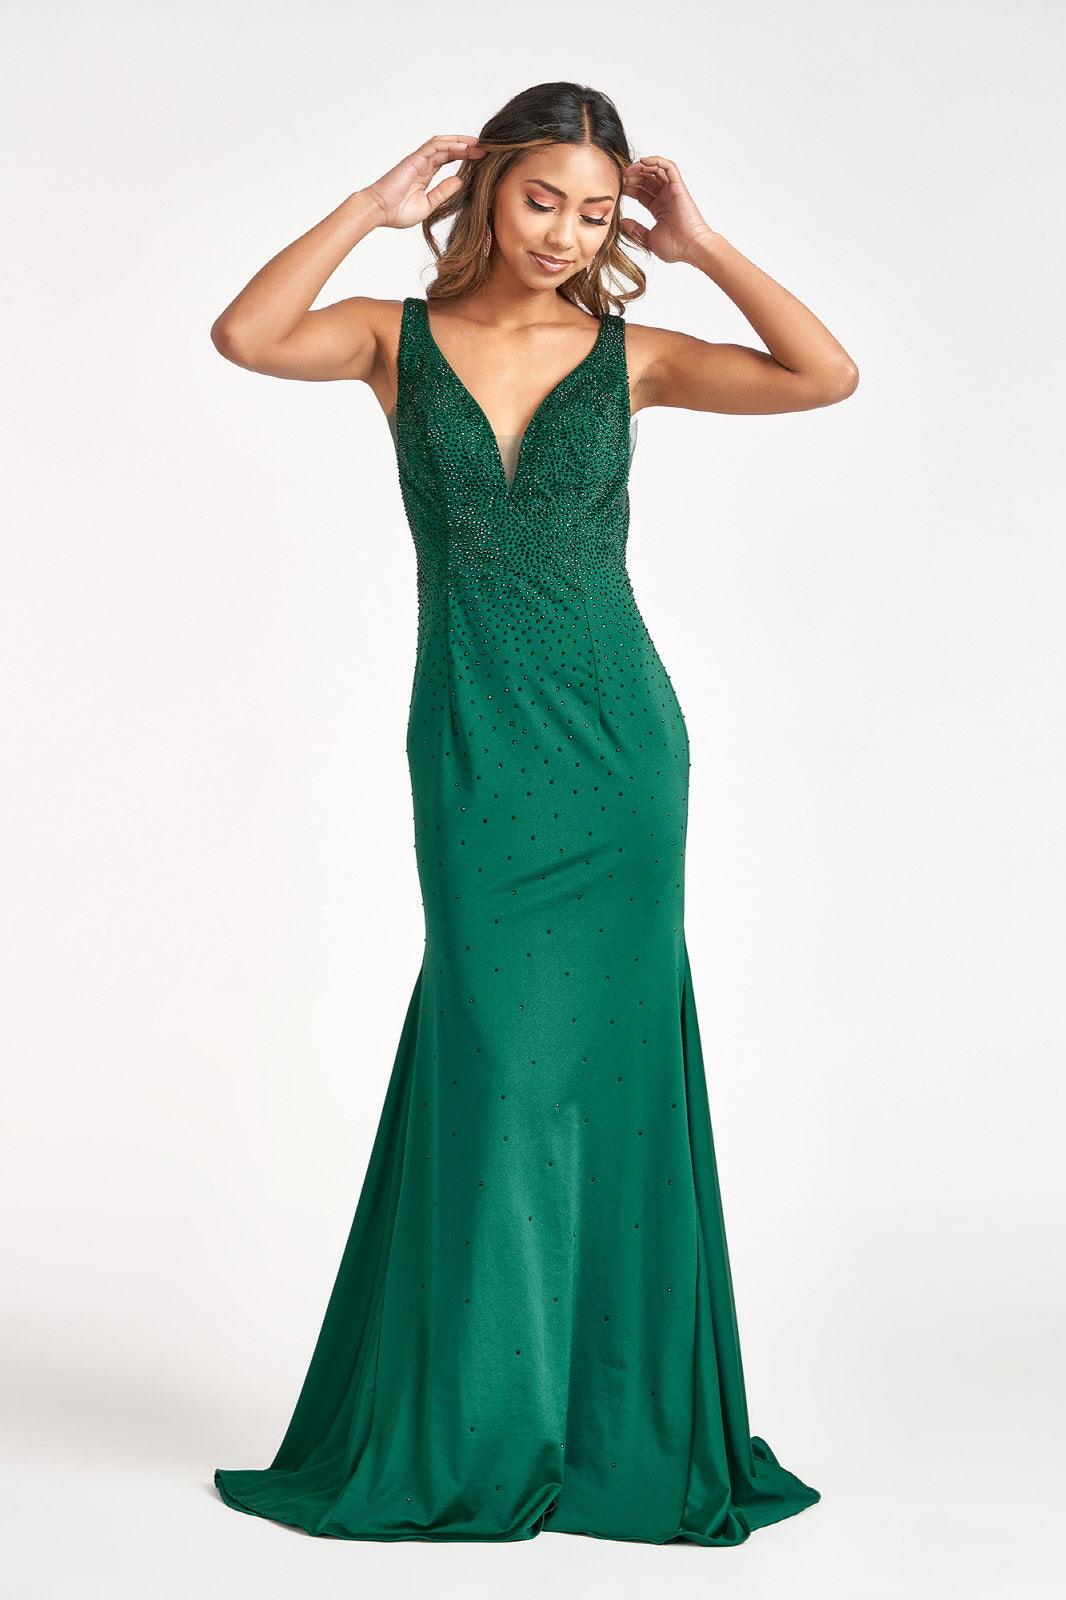 Long Sleeveless Formal Mermaid Fit Prom Dress - The Dress Outlet